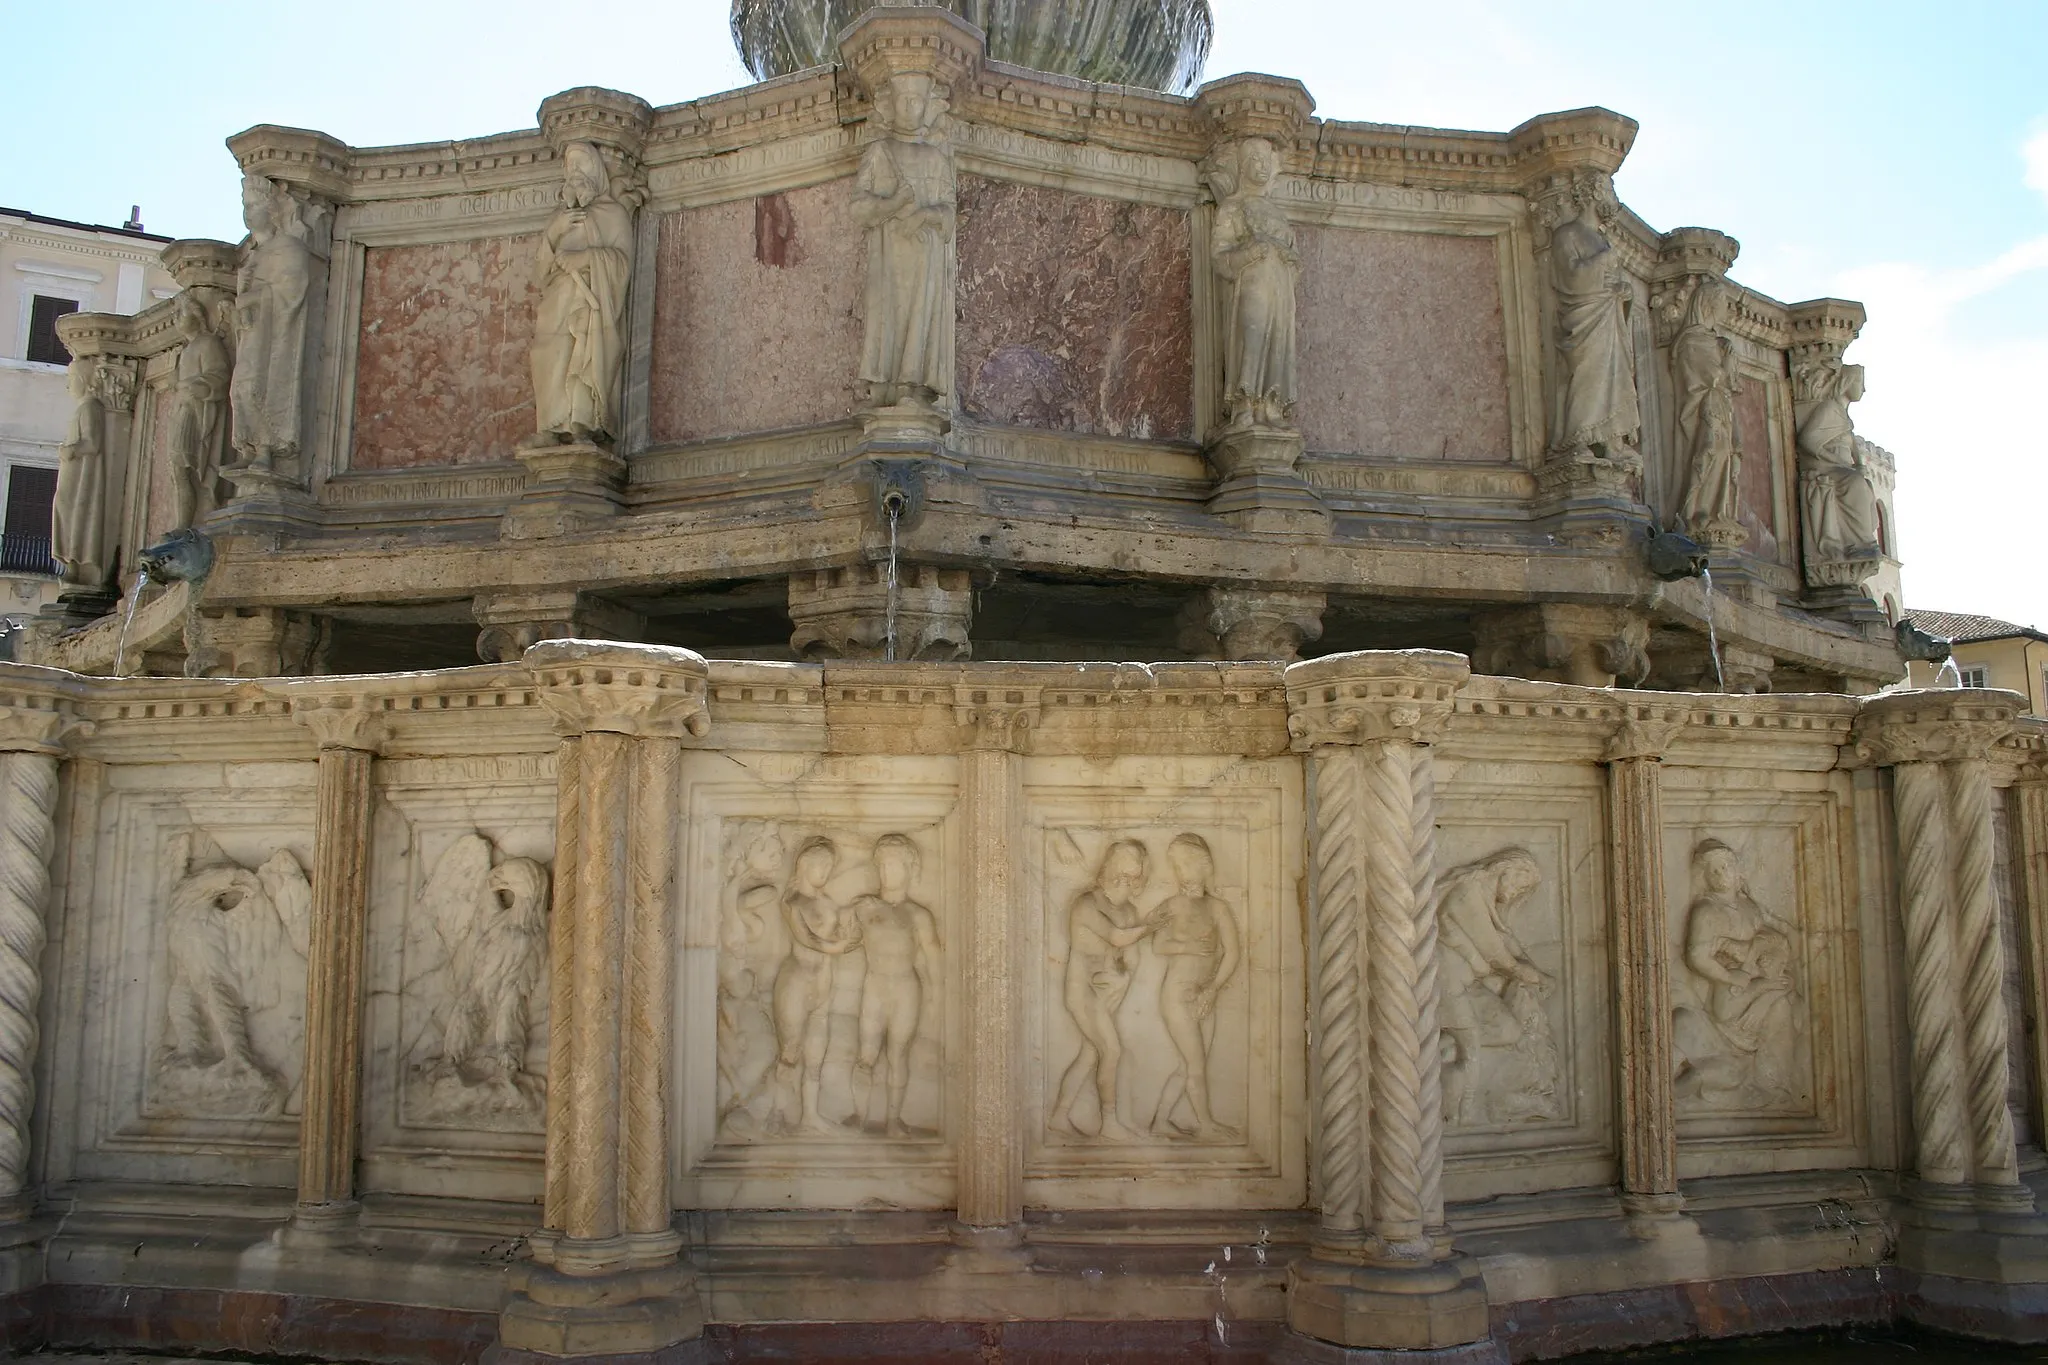 Photo showing: Perugia, the Fontana Maggiore (Main Fountain), sculpted after 1275 by Nicola Pisano and Giovanni Pisano. Picture by Giovanni Dall'Orto, August 6, 2006.